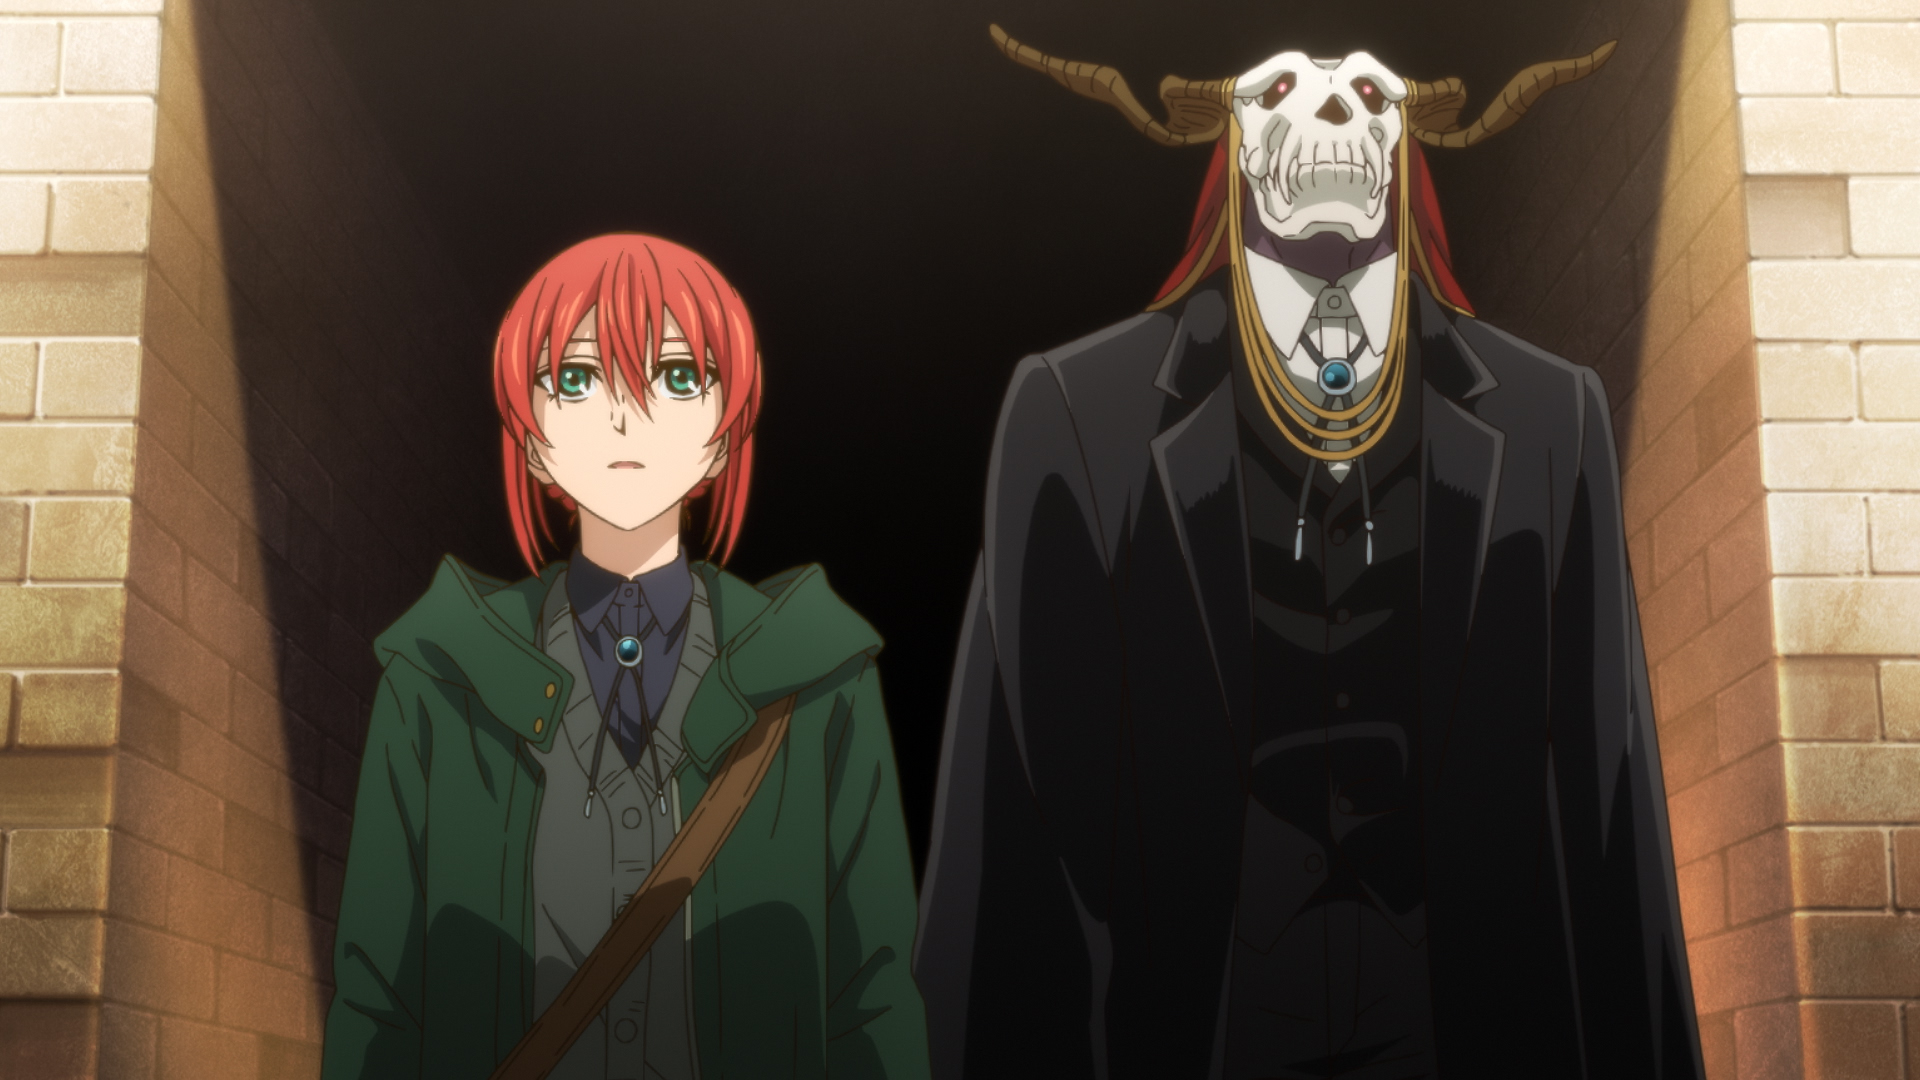 Crunchyroll - The Ancient Magus' Bride Anime to Conjure Up Original 3-Part OAD Series